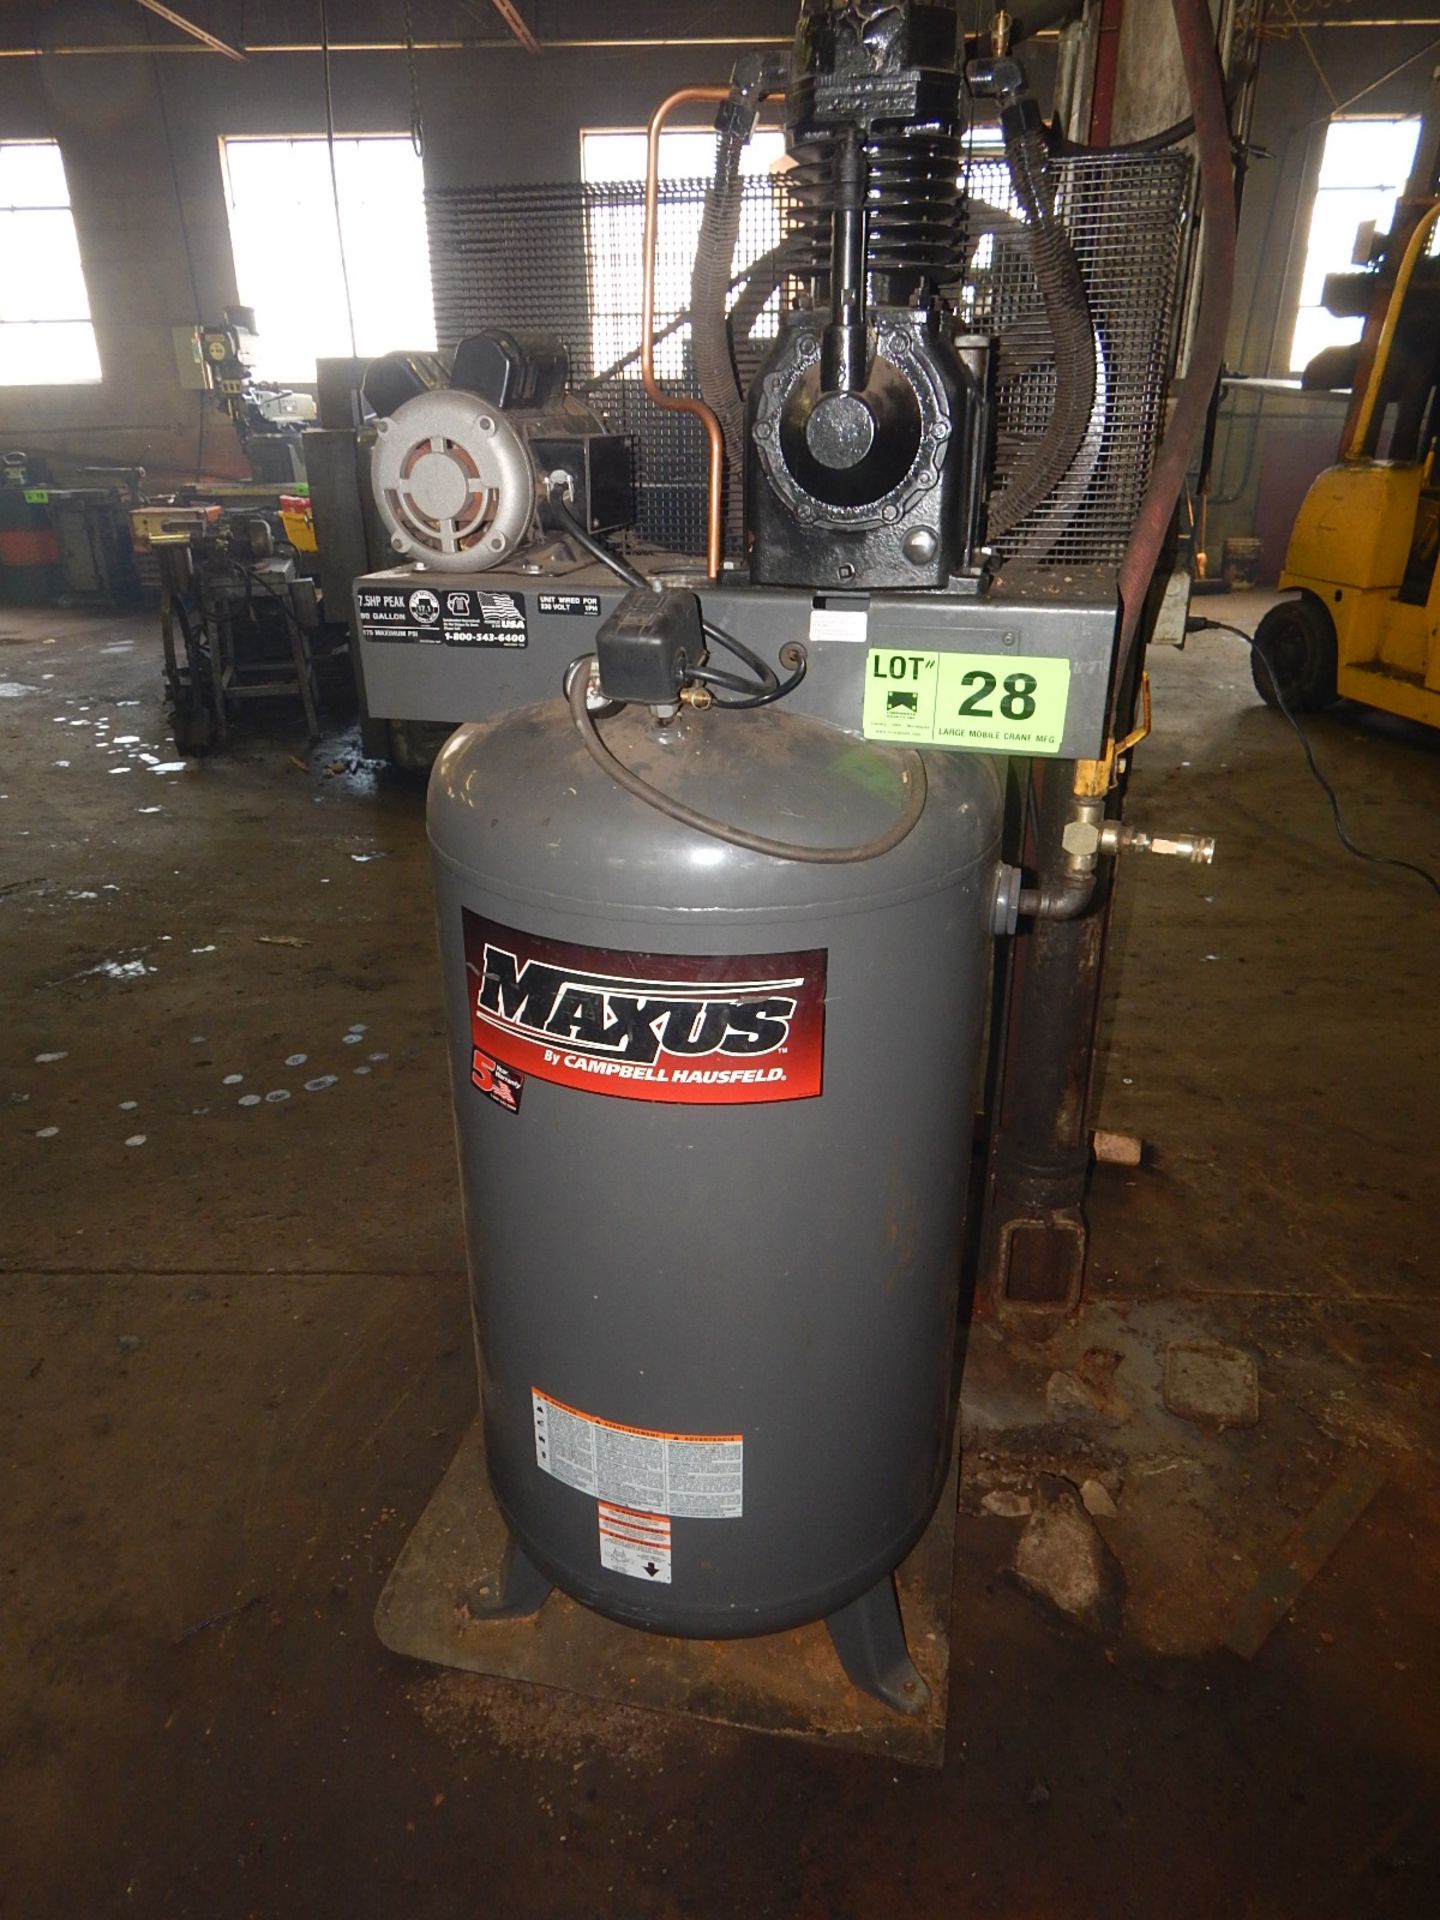 CAMPBELL-HAUSFELD MAXUS UPRIGHT TANK-MOUNTED AIR COMPRESSOR WITH 7.5 HP, 80 GAL. CAPACITY, S/N: